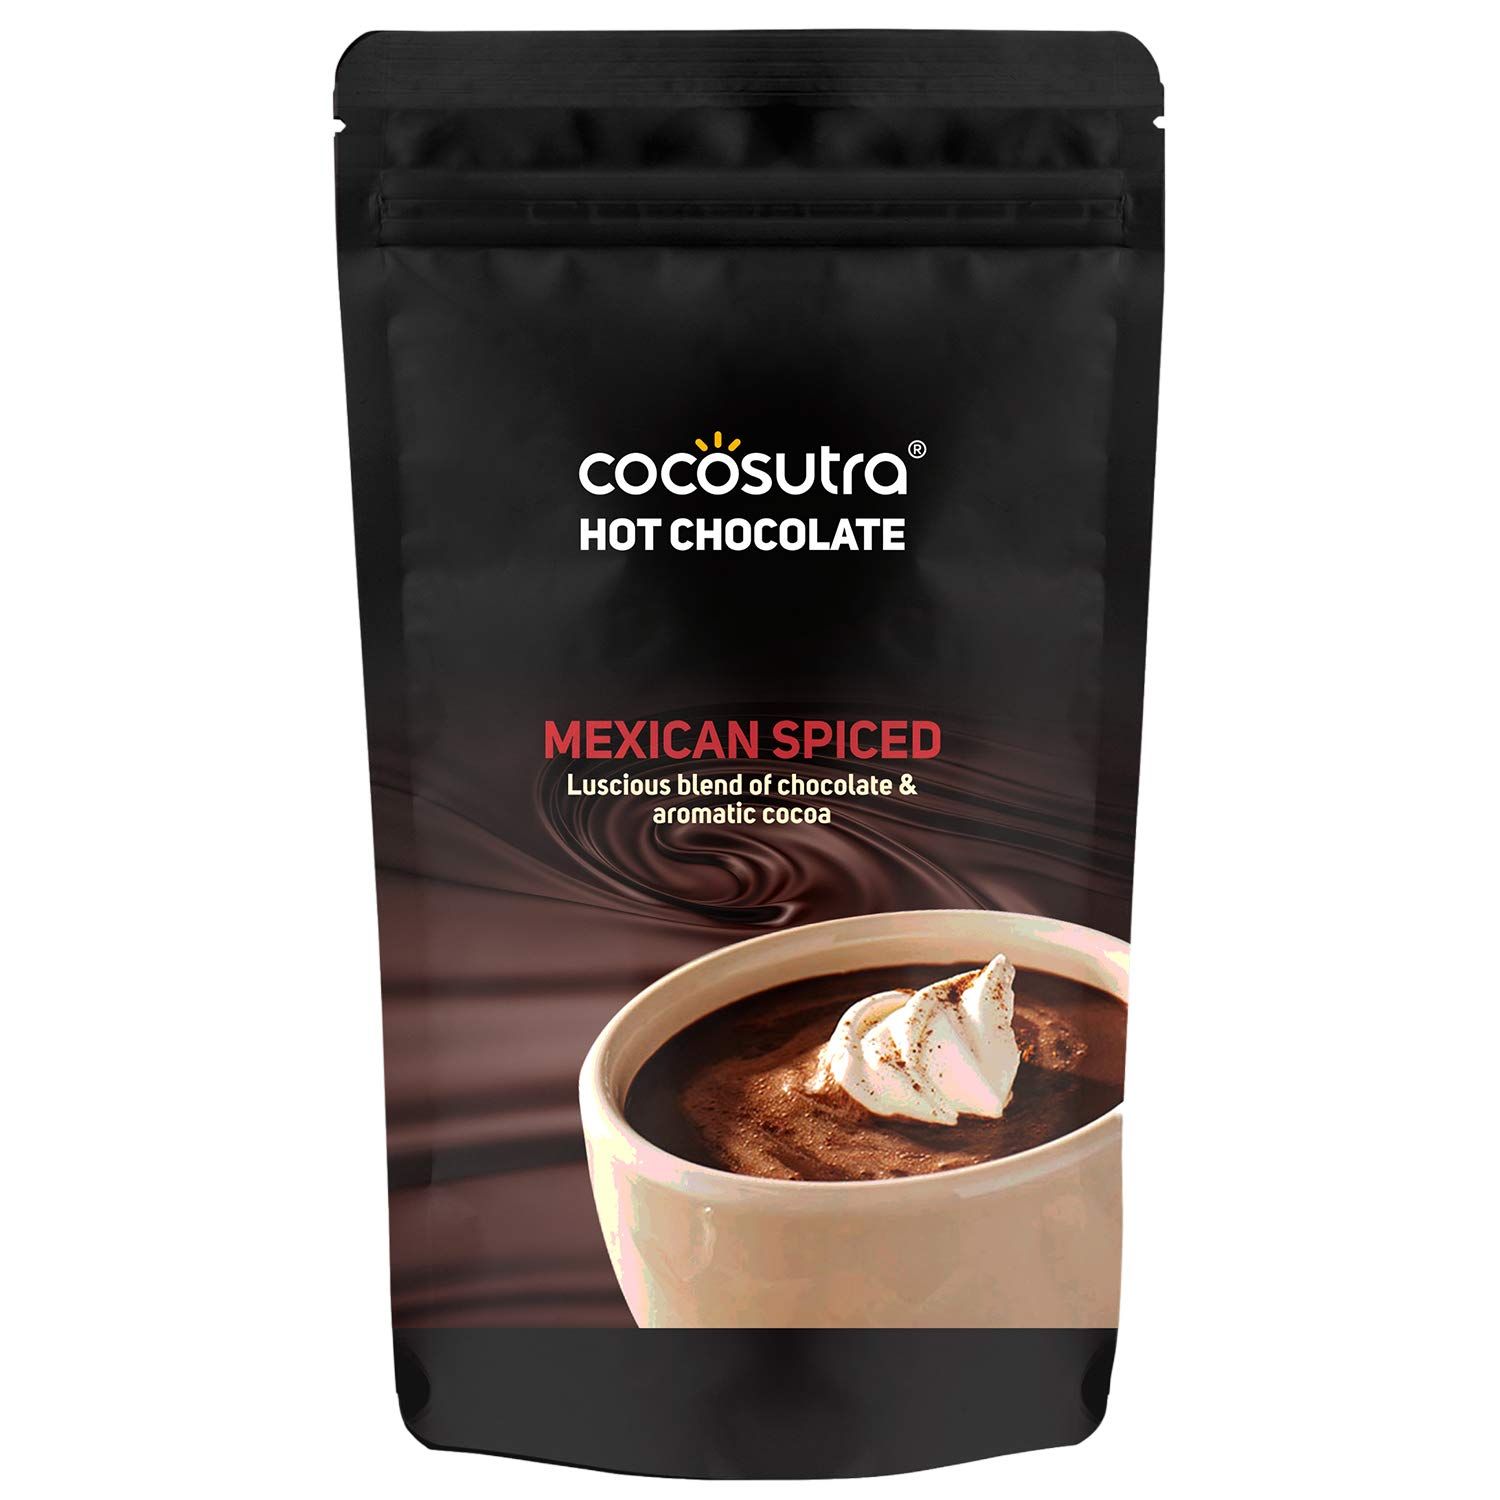 Cocosutra Hot Chocolate Mexican Spiced Image